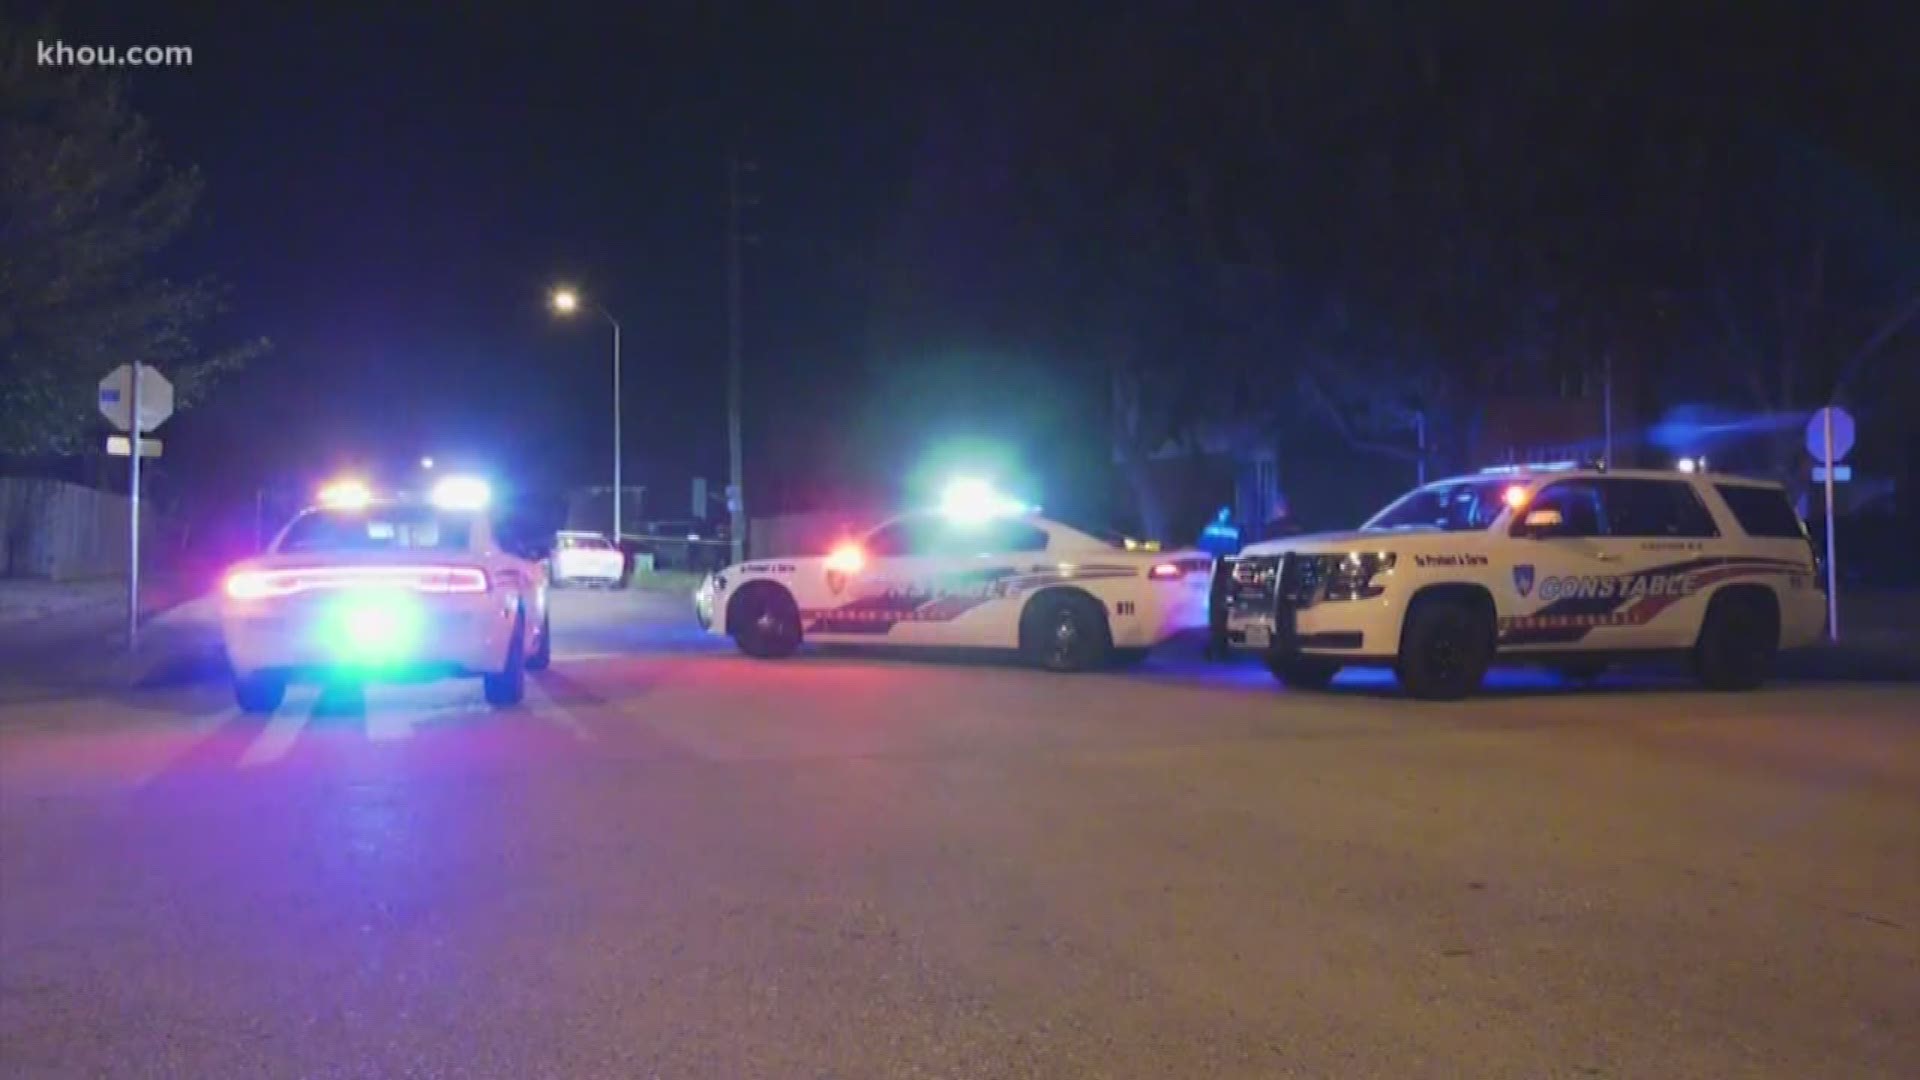 Deputies are investigating after they found a teenager shot multiple times in Atascocita. The teenager was flown to the hospital where he later died.